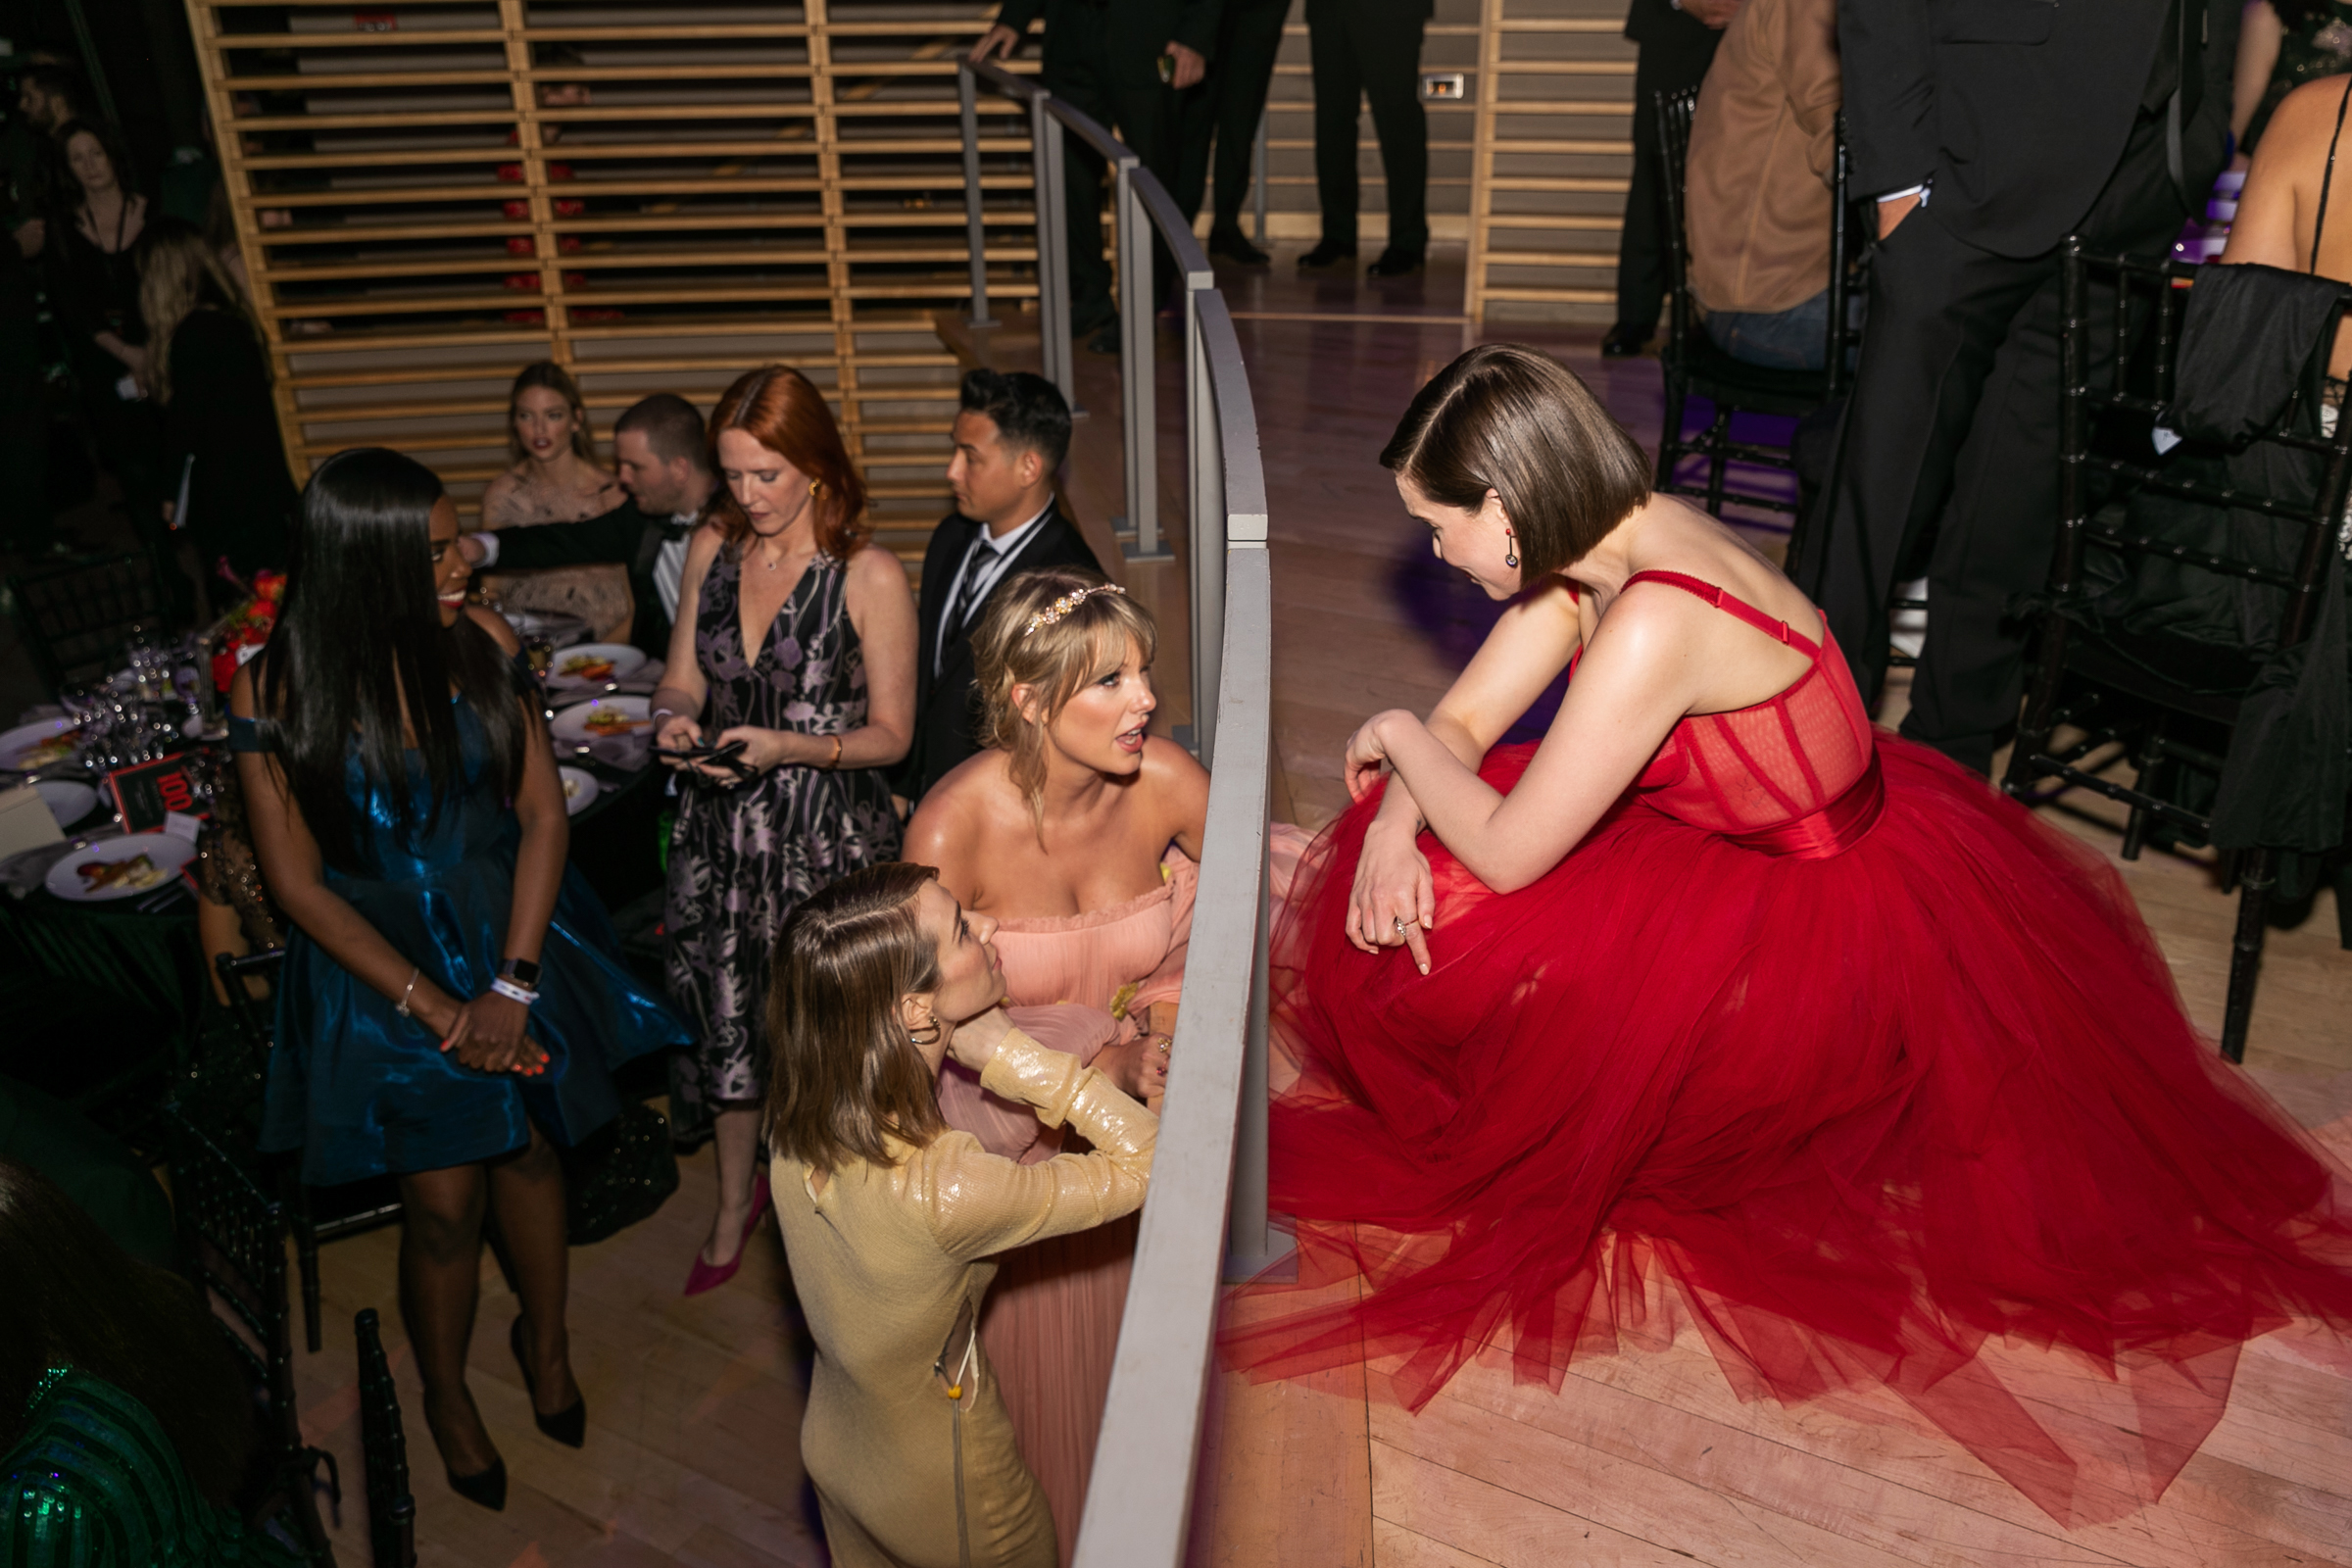 Taylor Swift and Emilia Clarke at the Time 100 Gala at Jazz at Lincoln Center in New York City on April 23, 2019.